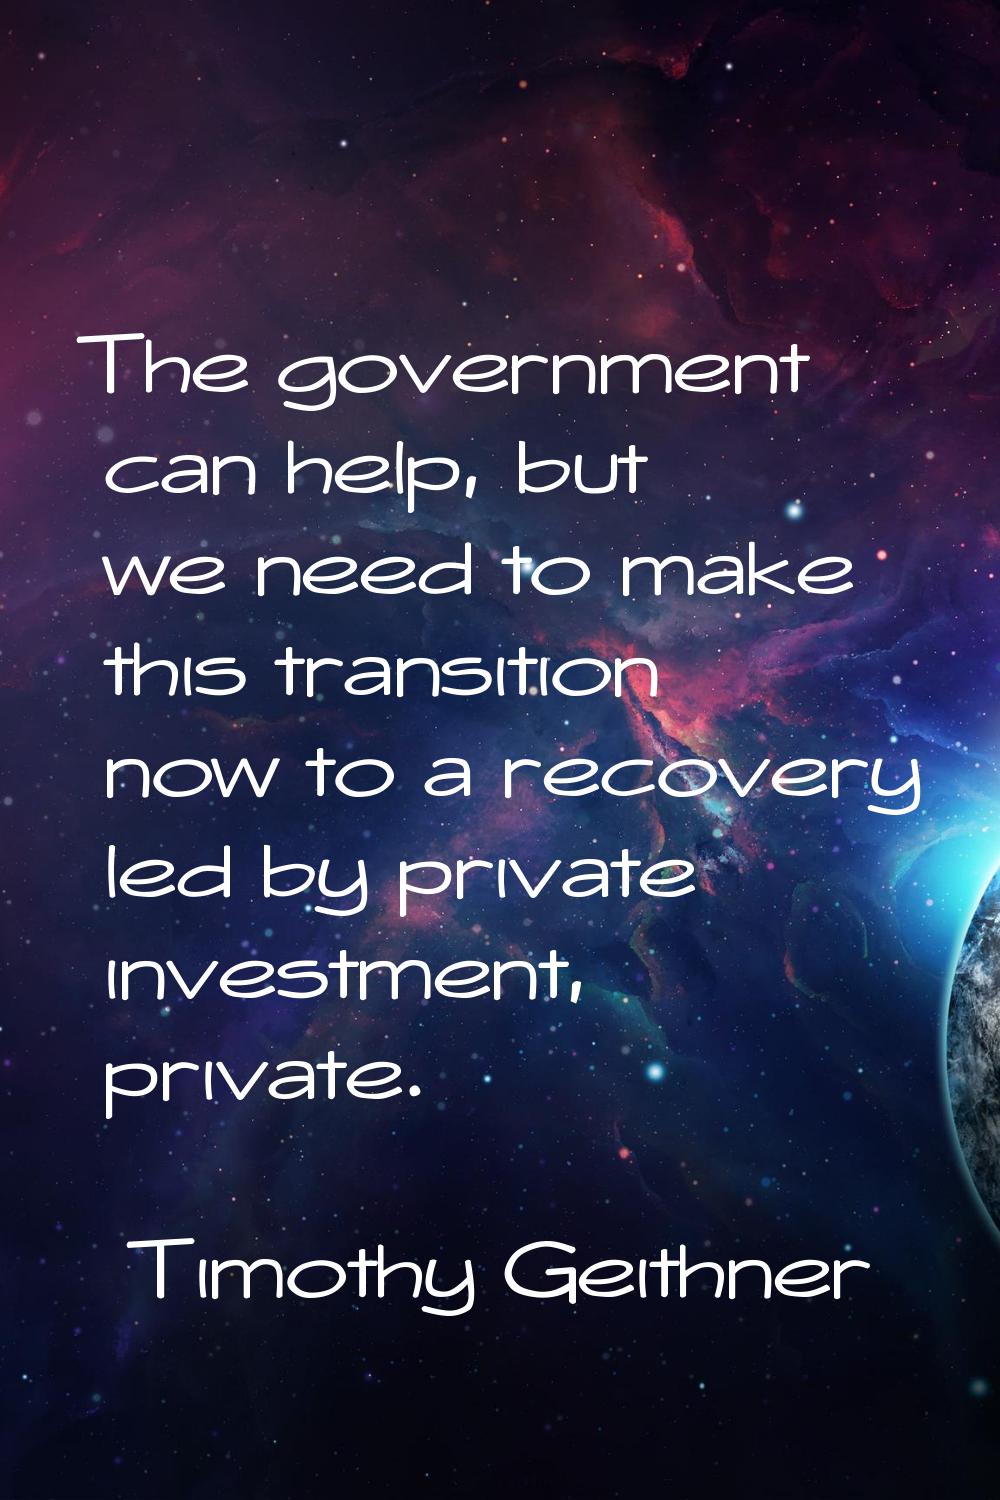 The government can help, but we need to make this transition now to a recovery led by private inves